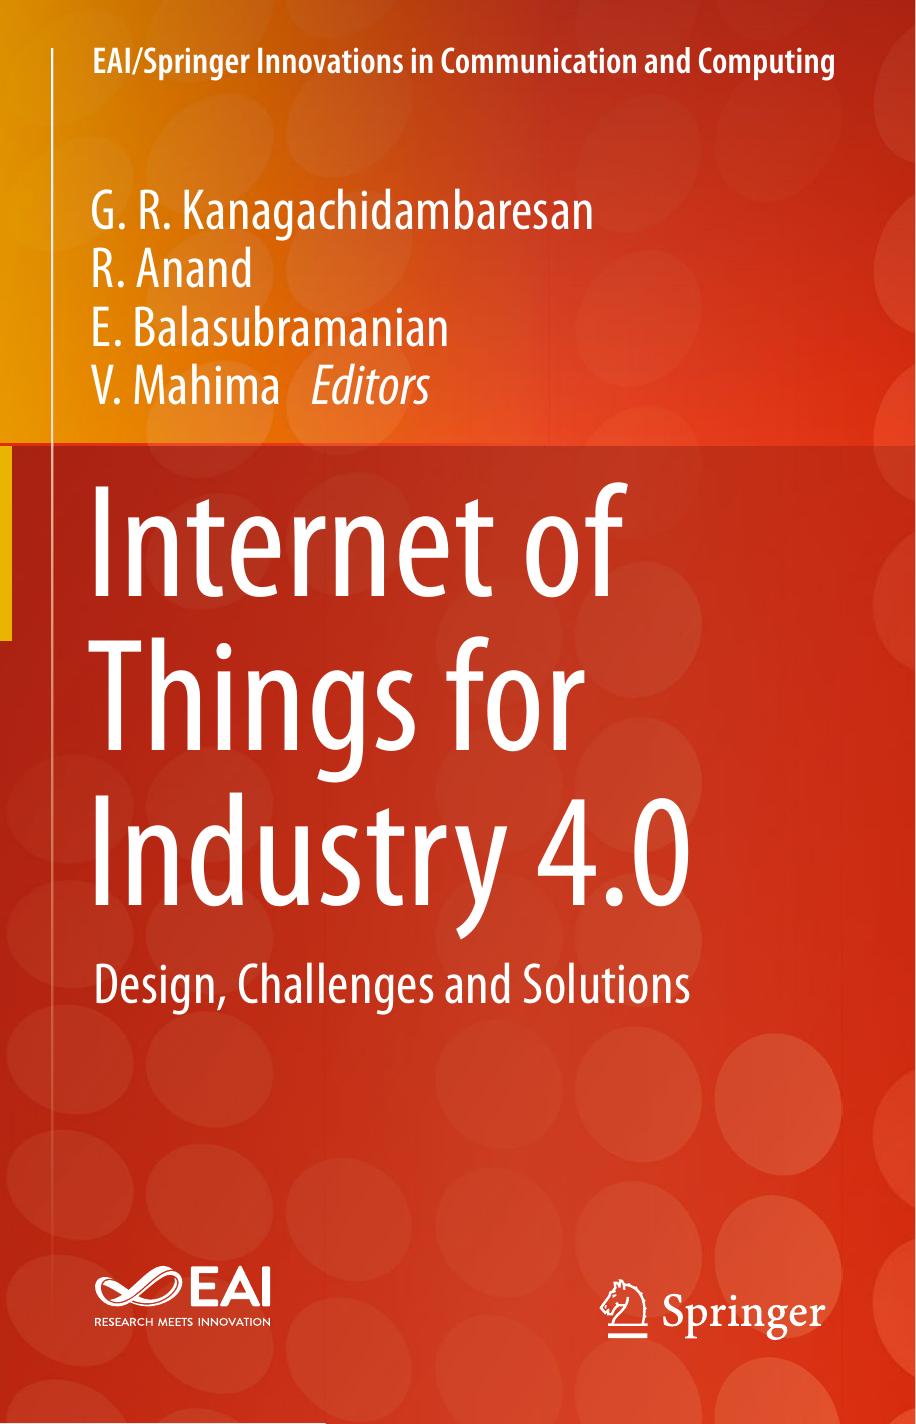 Internet of Things for Industry 4.0: Design, Challenges and Solutions